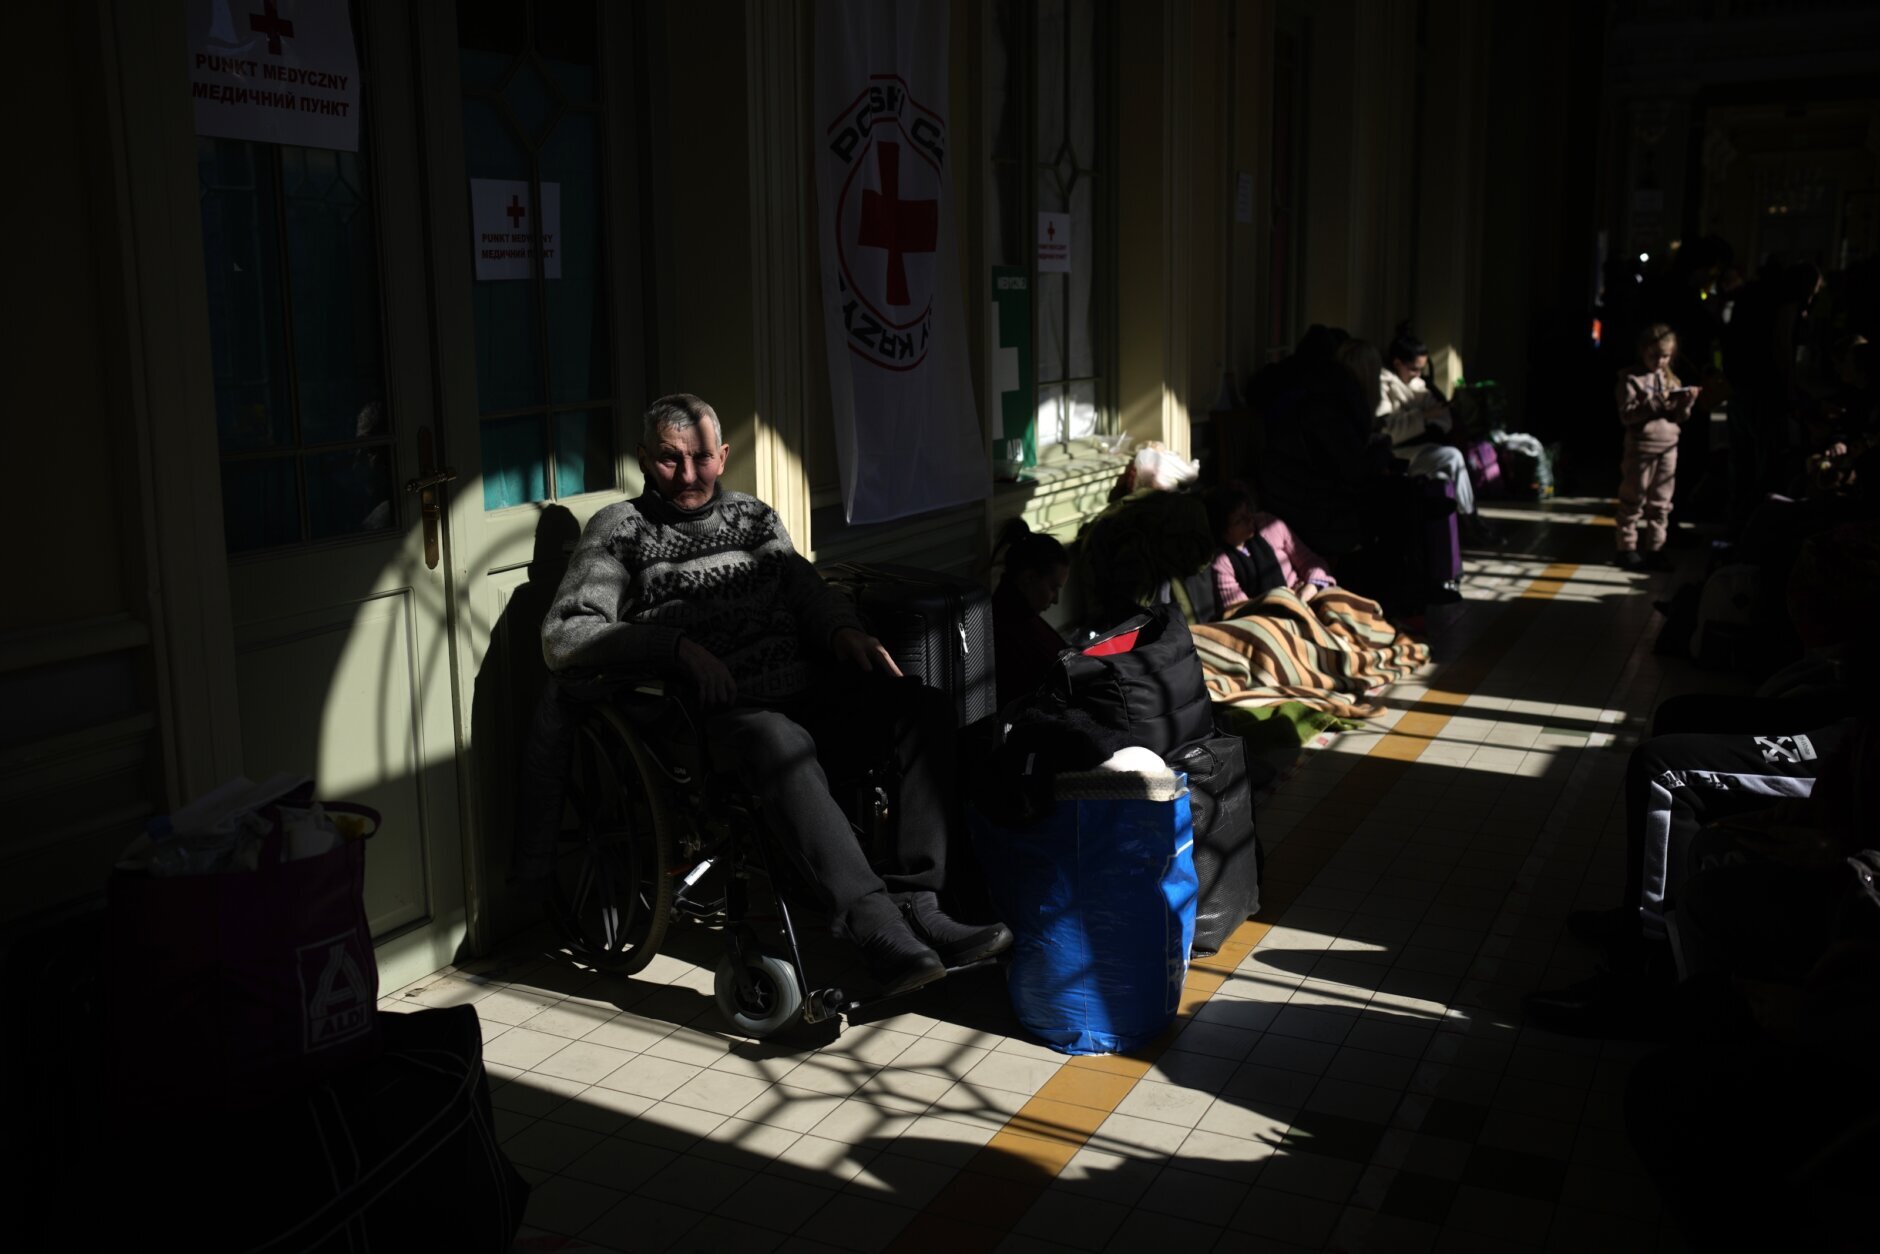 A Ukrainian sitting man in a wheel chair, waits with other refugees at Przemysl train station, southeastern Poland, on Friday, March 11, 2022. Thousands of people have been killed and more than 2.3 million have fled the country since Russian troops crossed into Ukraine on Feb. 24. (AP Photo/Daniel Cole)